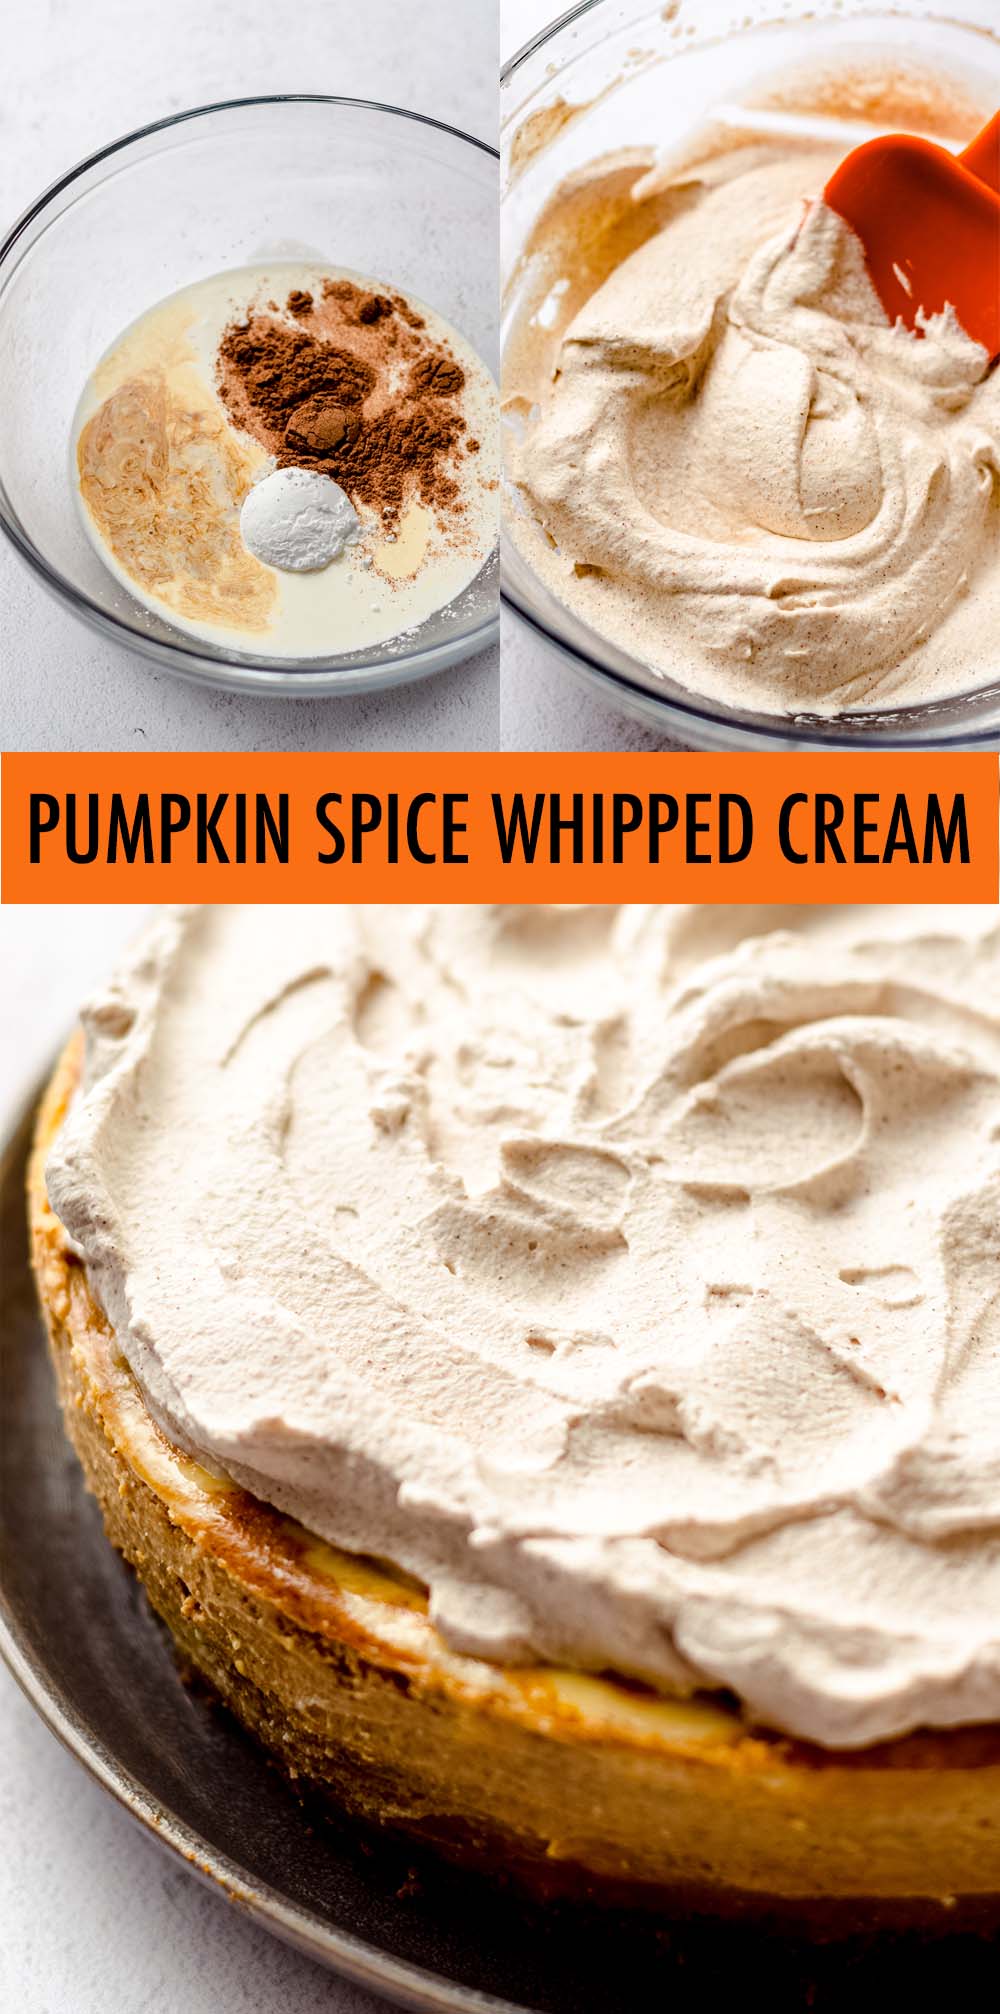 Every fall dessert (or drink!) needs a fall topping! Make your own pumpkin spice whipped cream to garnish all of your favorite fall desserts. It tastes way better than anything you can buy at the store and you only need 4 simple ingredients to make it. via @frshaprilflours